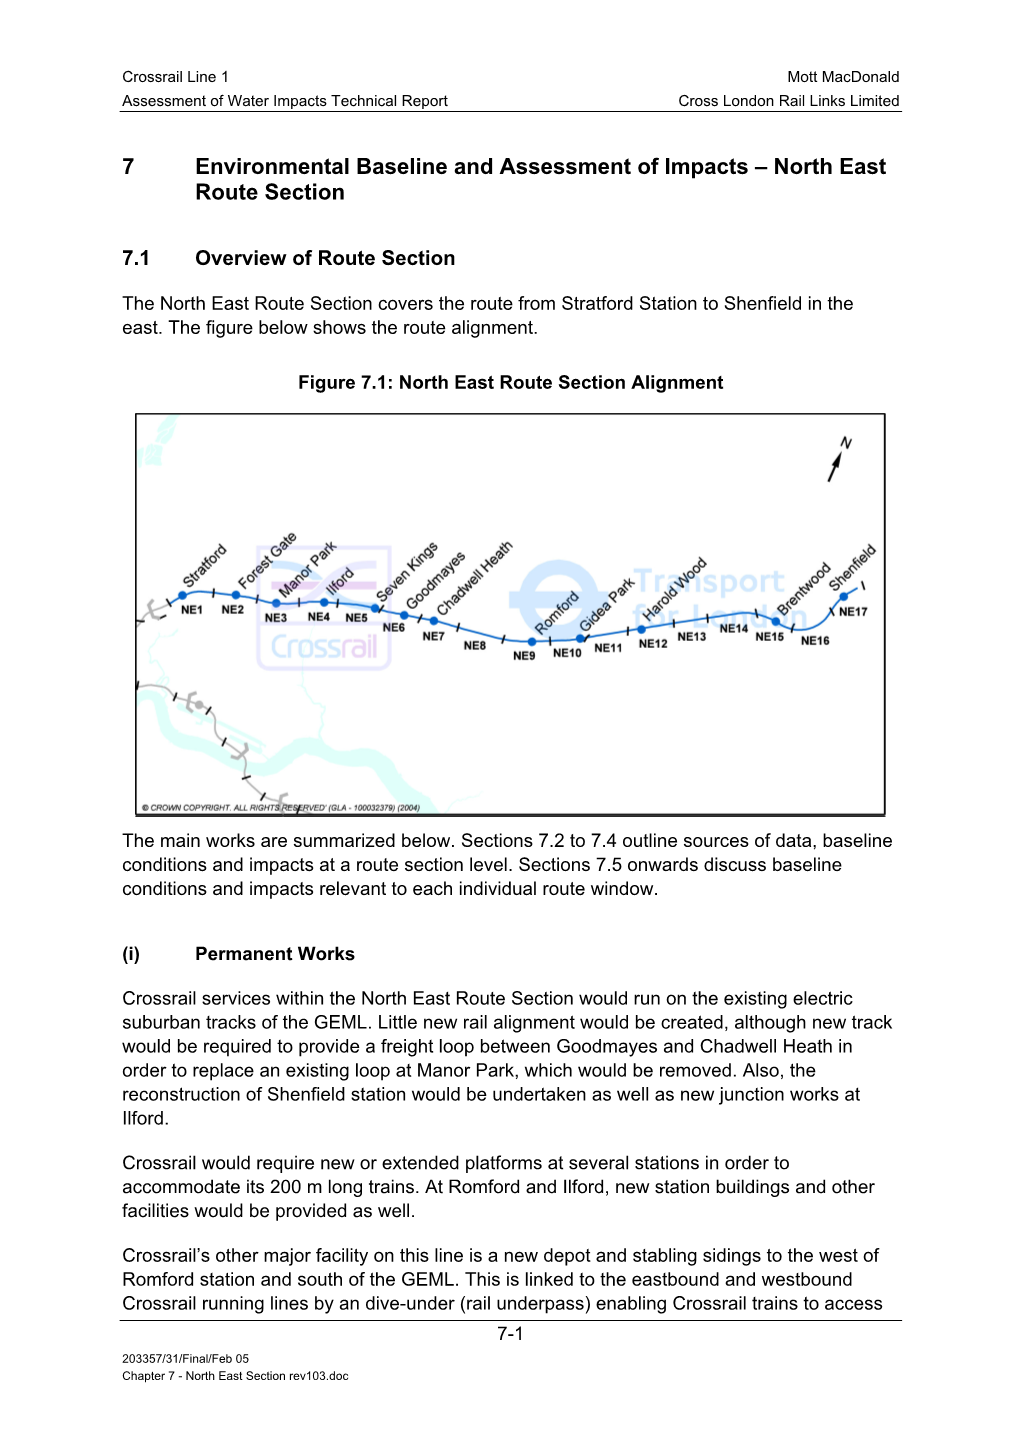 7 Environmental Baseline and Assessment of Impacts – North East Route Section